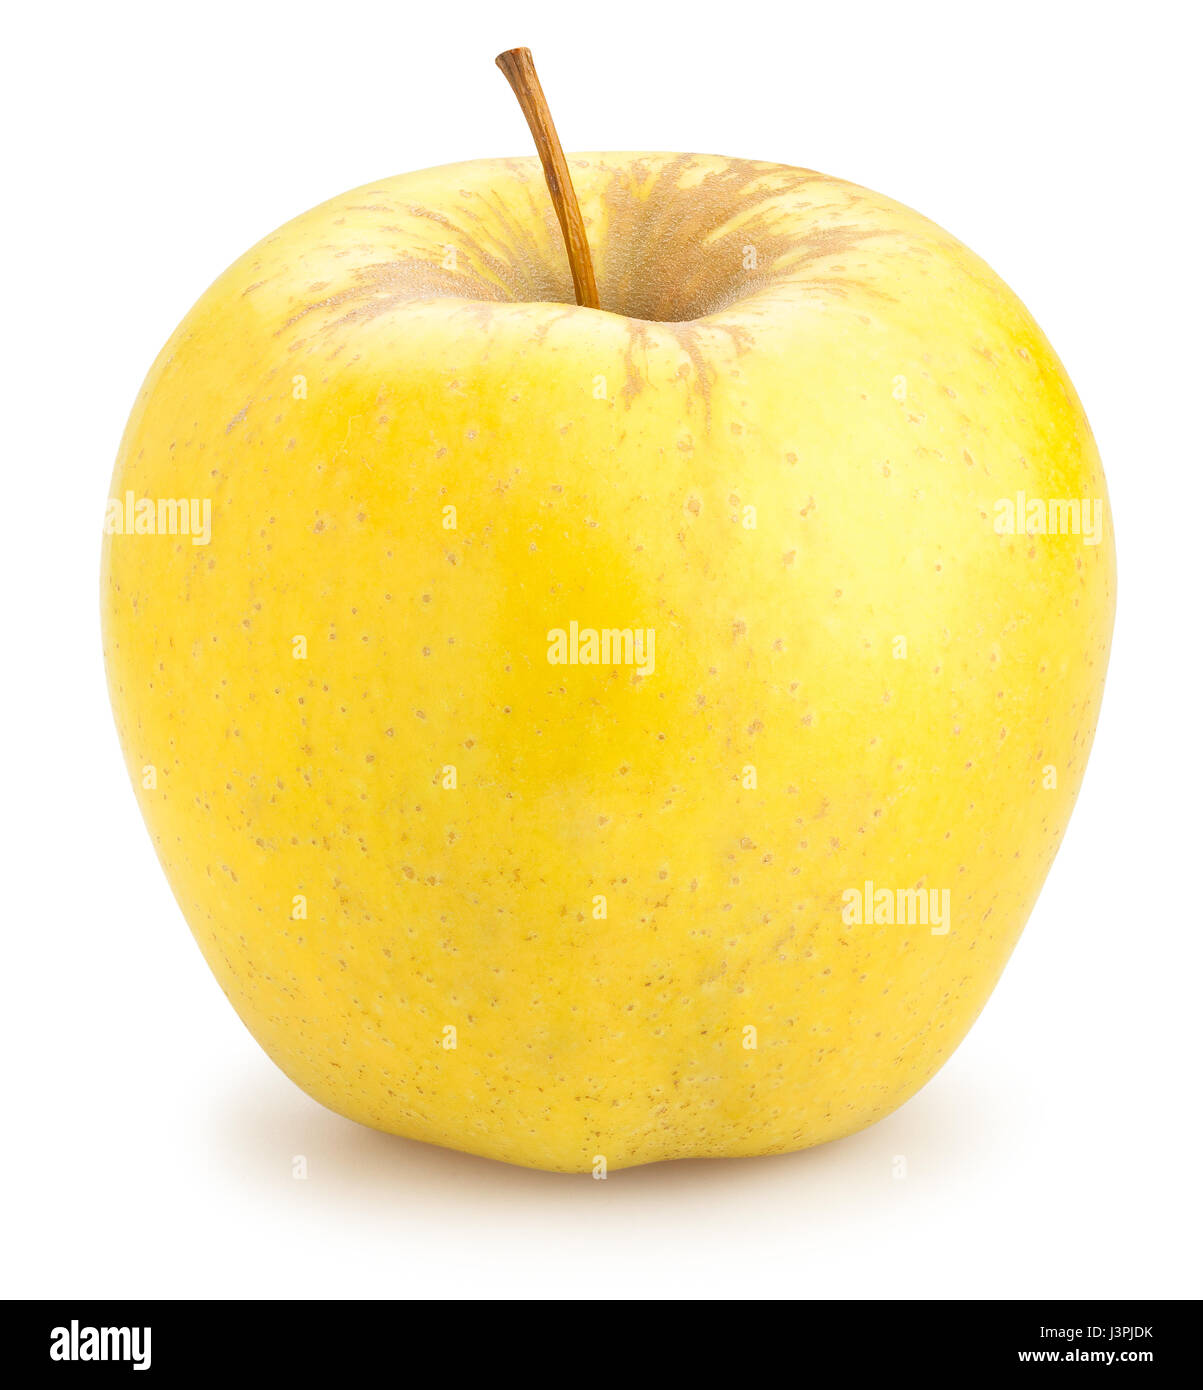 golden delicious apples isolated Stock Photo